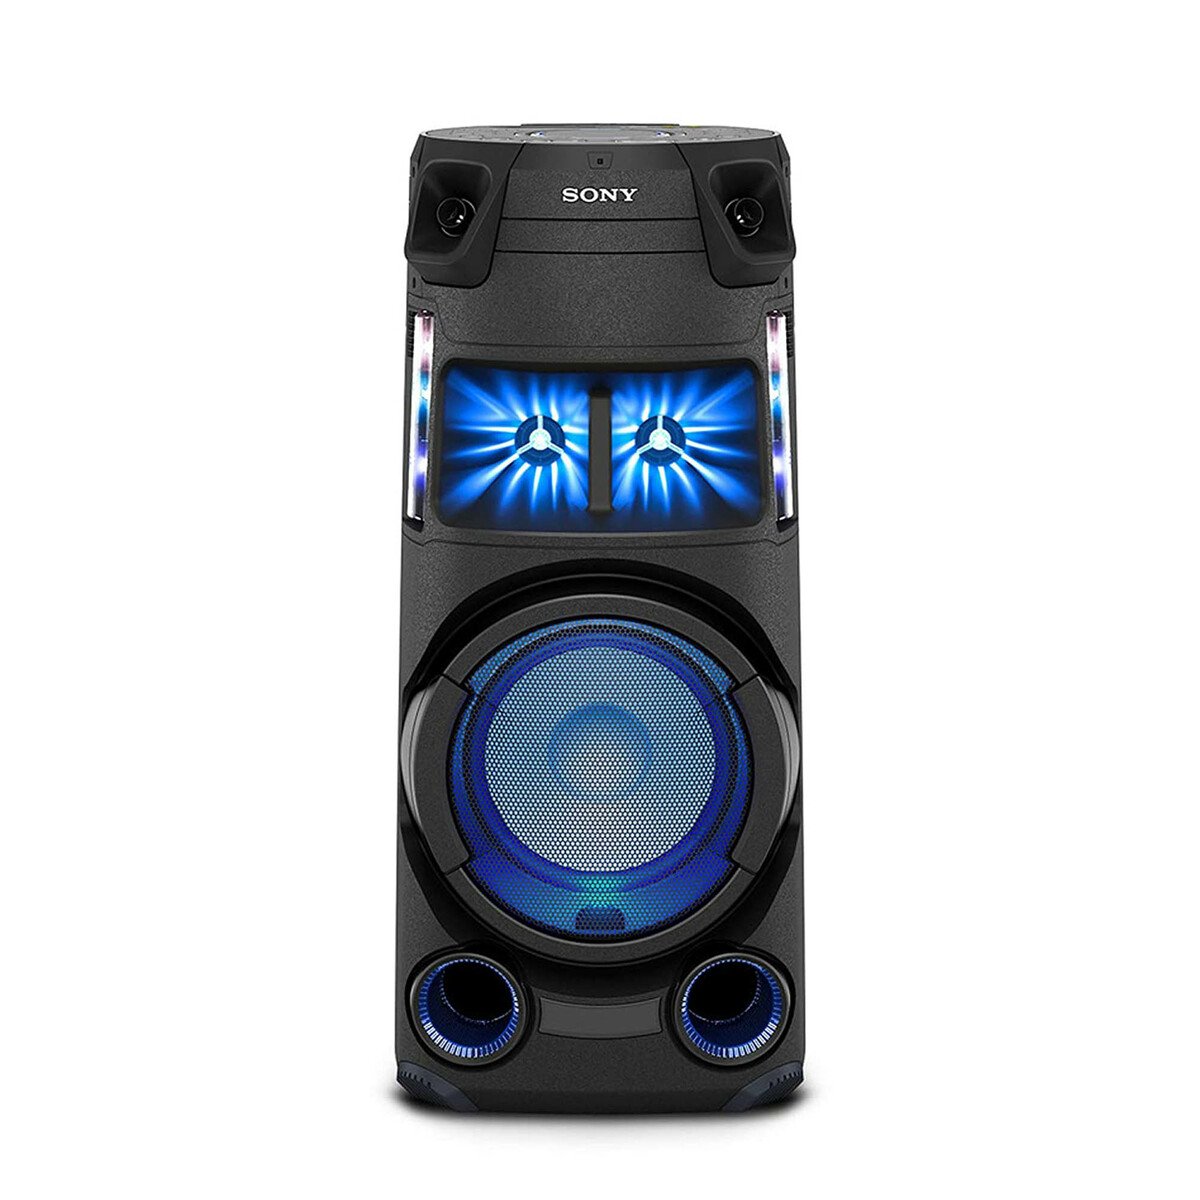 Sony One Box HiFi MHC-V43D 400 Watts Speciality Speaker with Bluetooth Connectivity